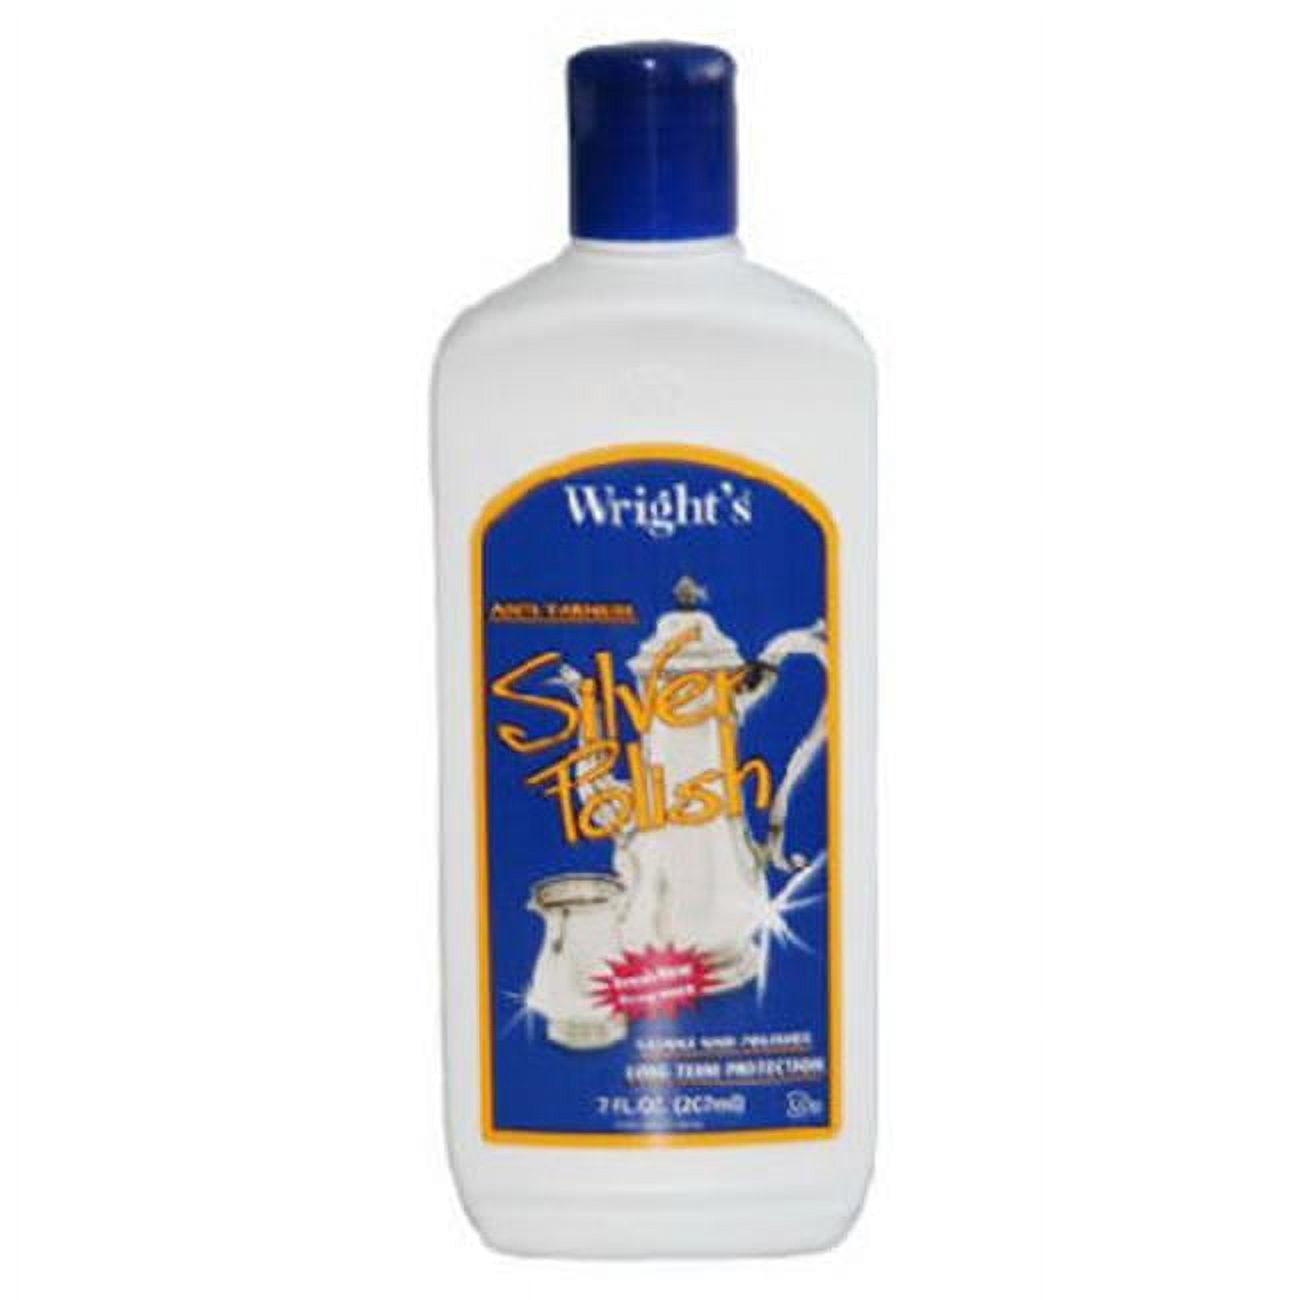 Wright's Silver Cleaner and Polish Cream - 8 Oz 3 PACK